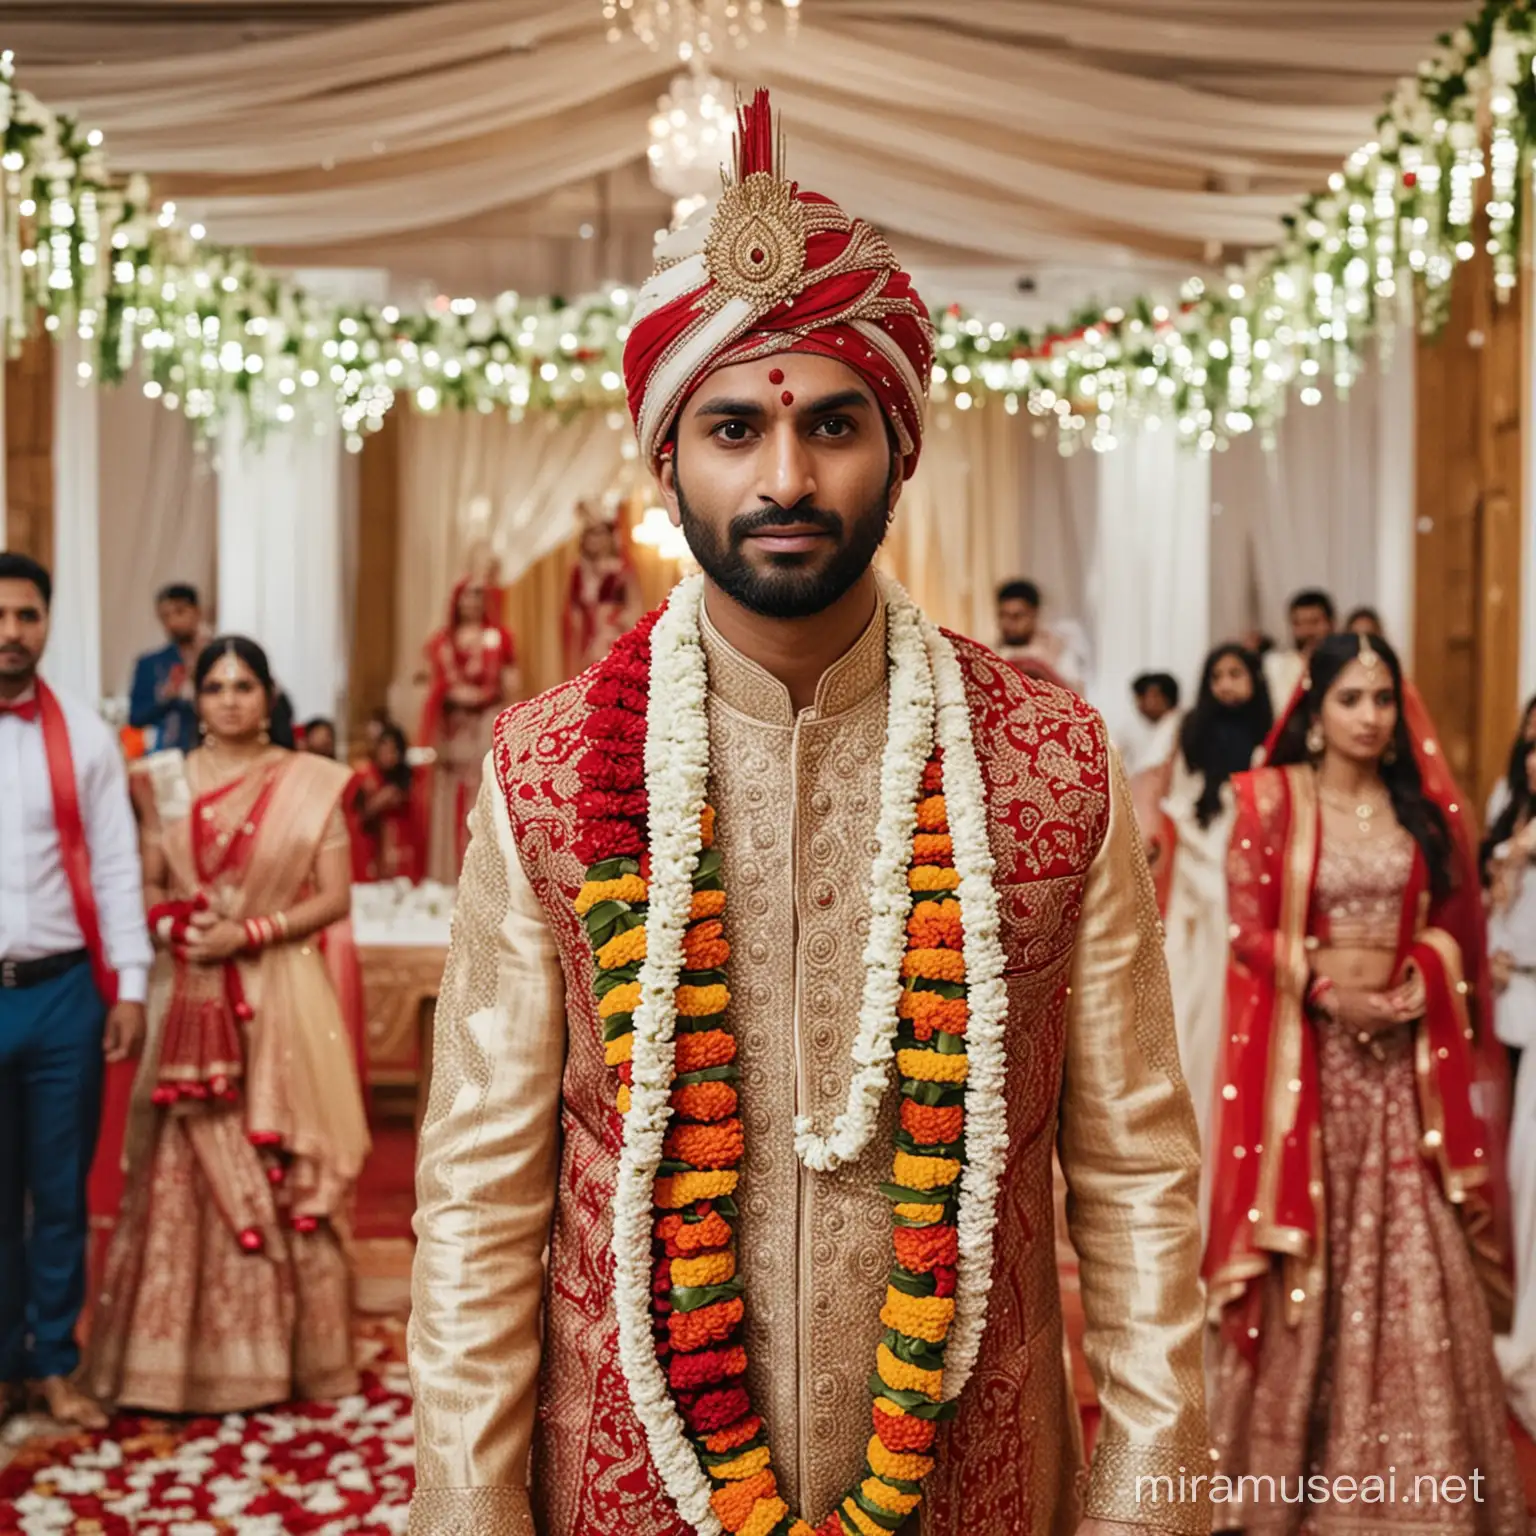 Indian Groom with Angry Expression in Wedding Hall Wearing Garland